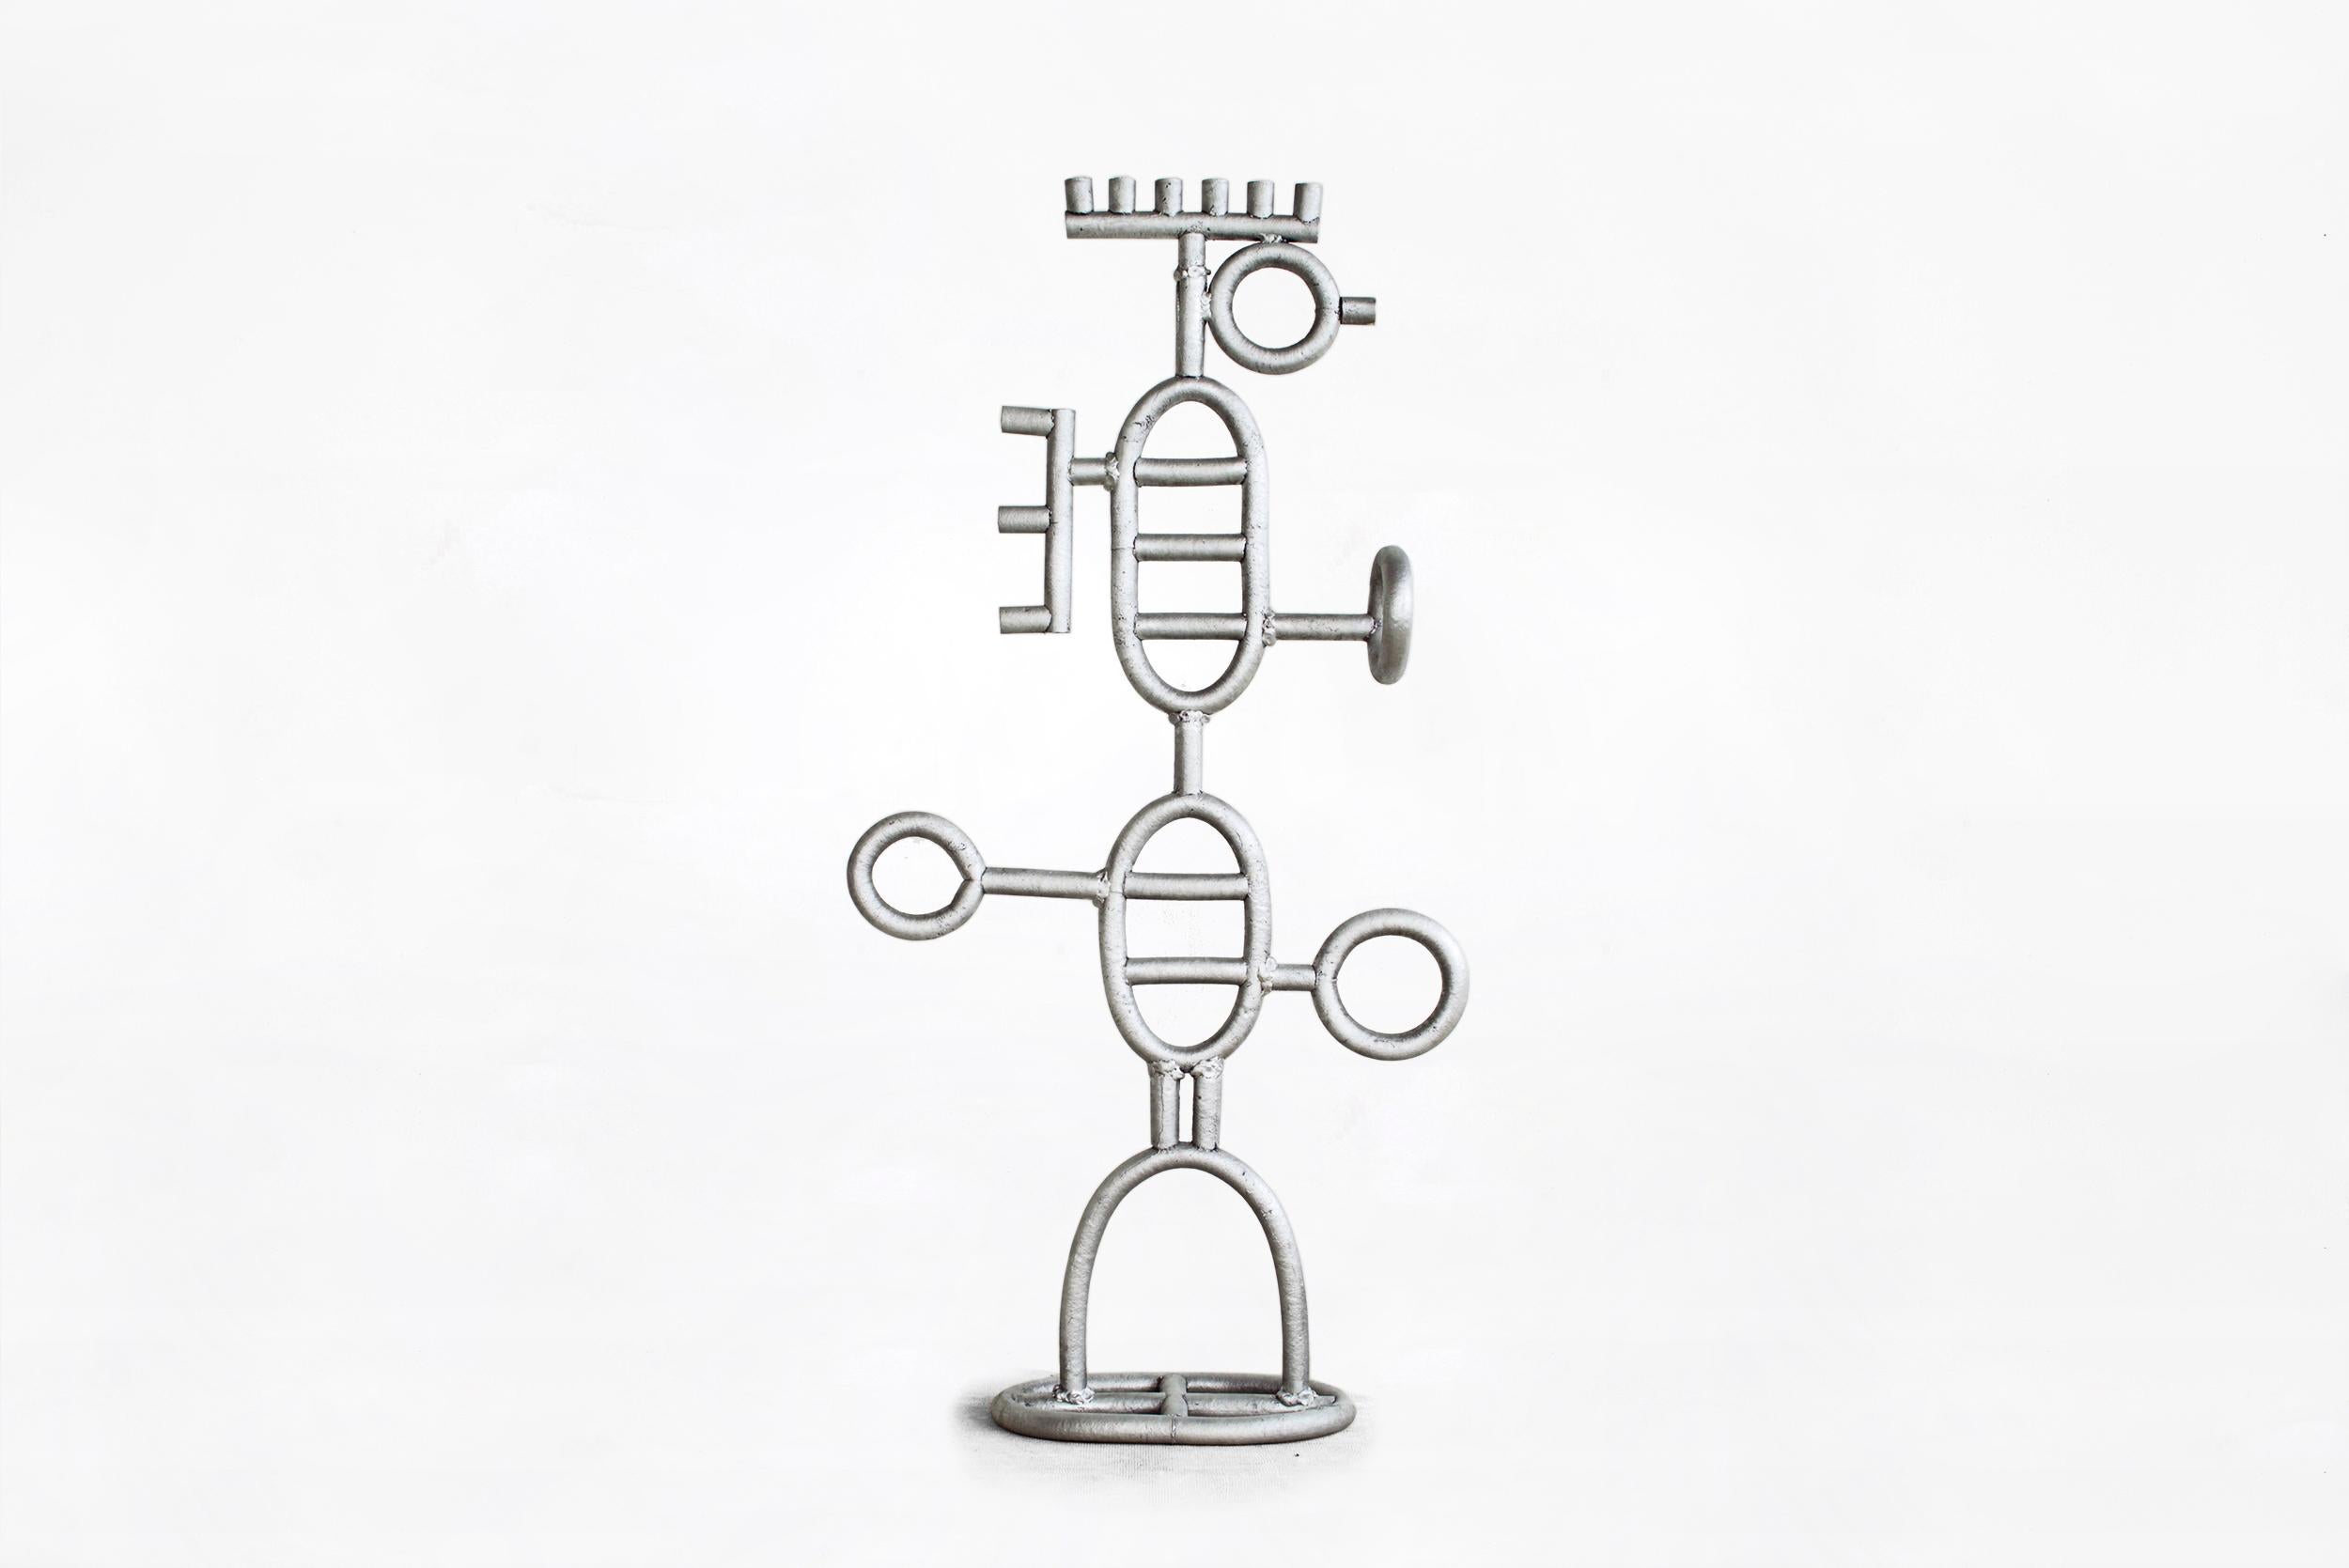 Contemporary Sigve Knutson Cast Aluminium Hanger, Manufactured by Sigve Knutson Oslo, 2019 For Sale